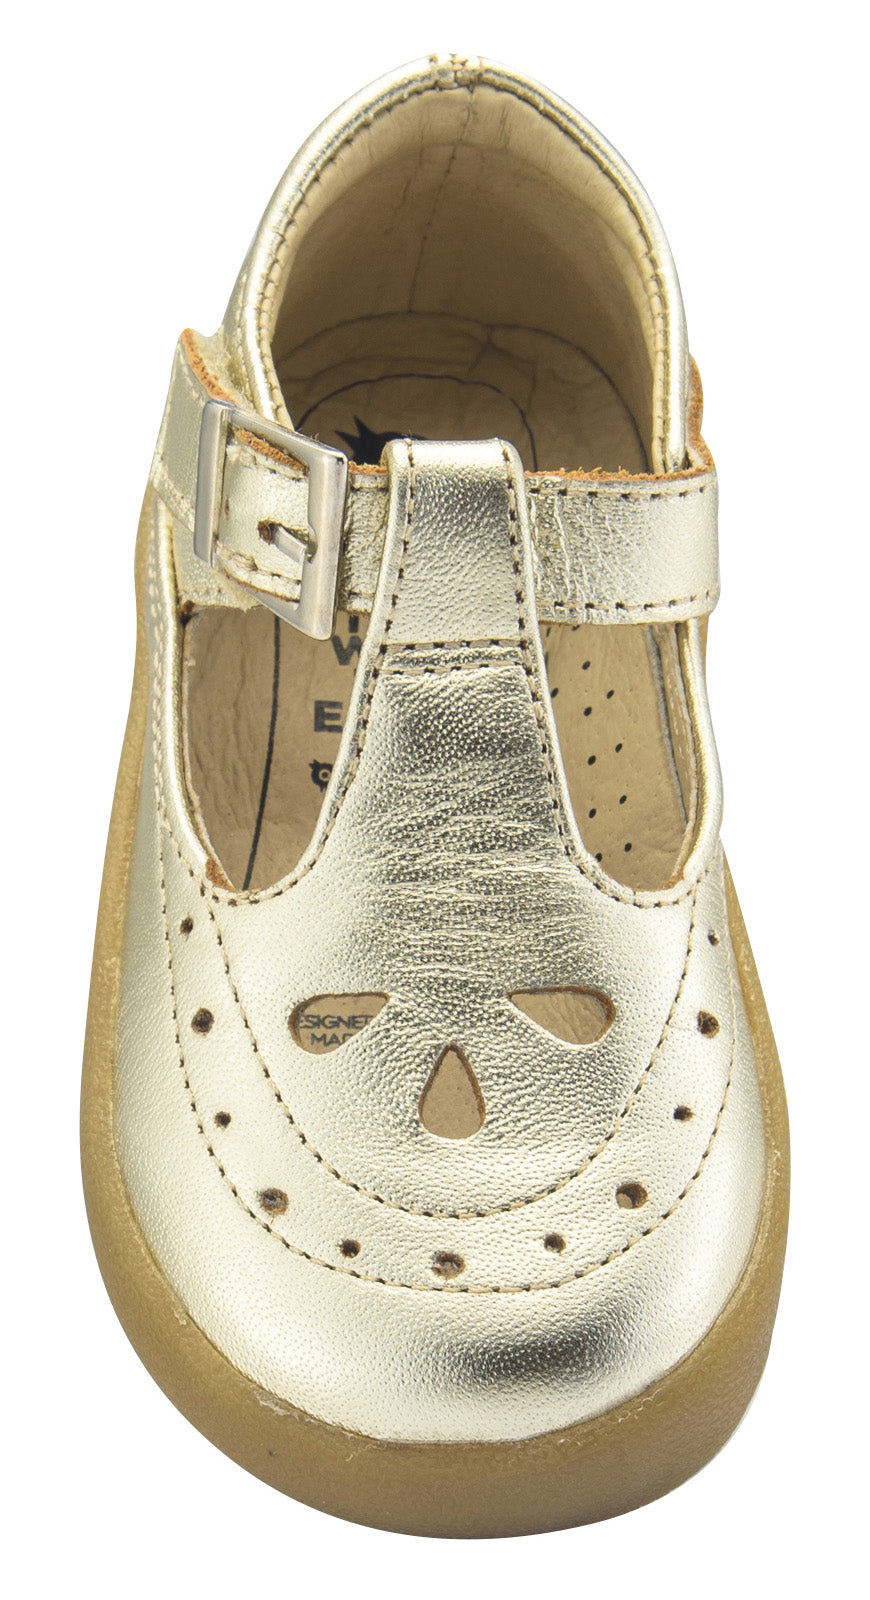 Old Soles Girl's Royal Shoe Leather Mary Jane Dress Shoes, Gold